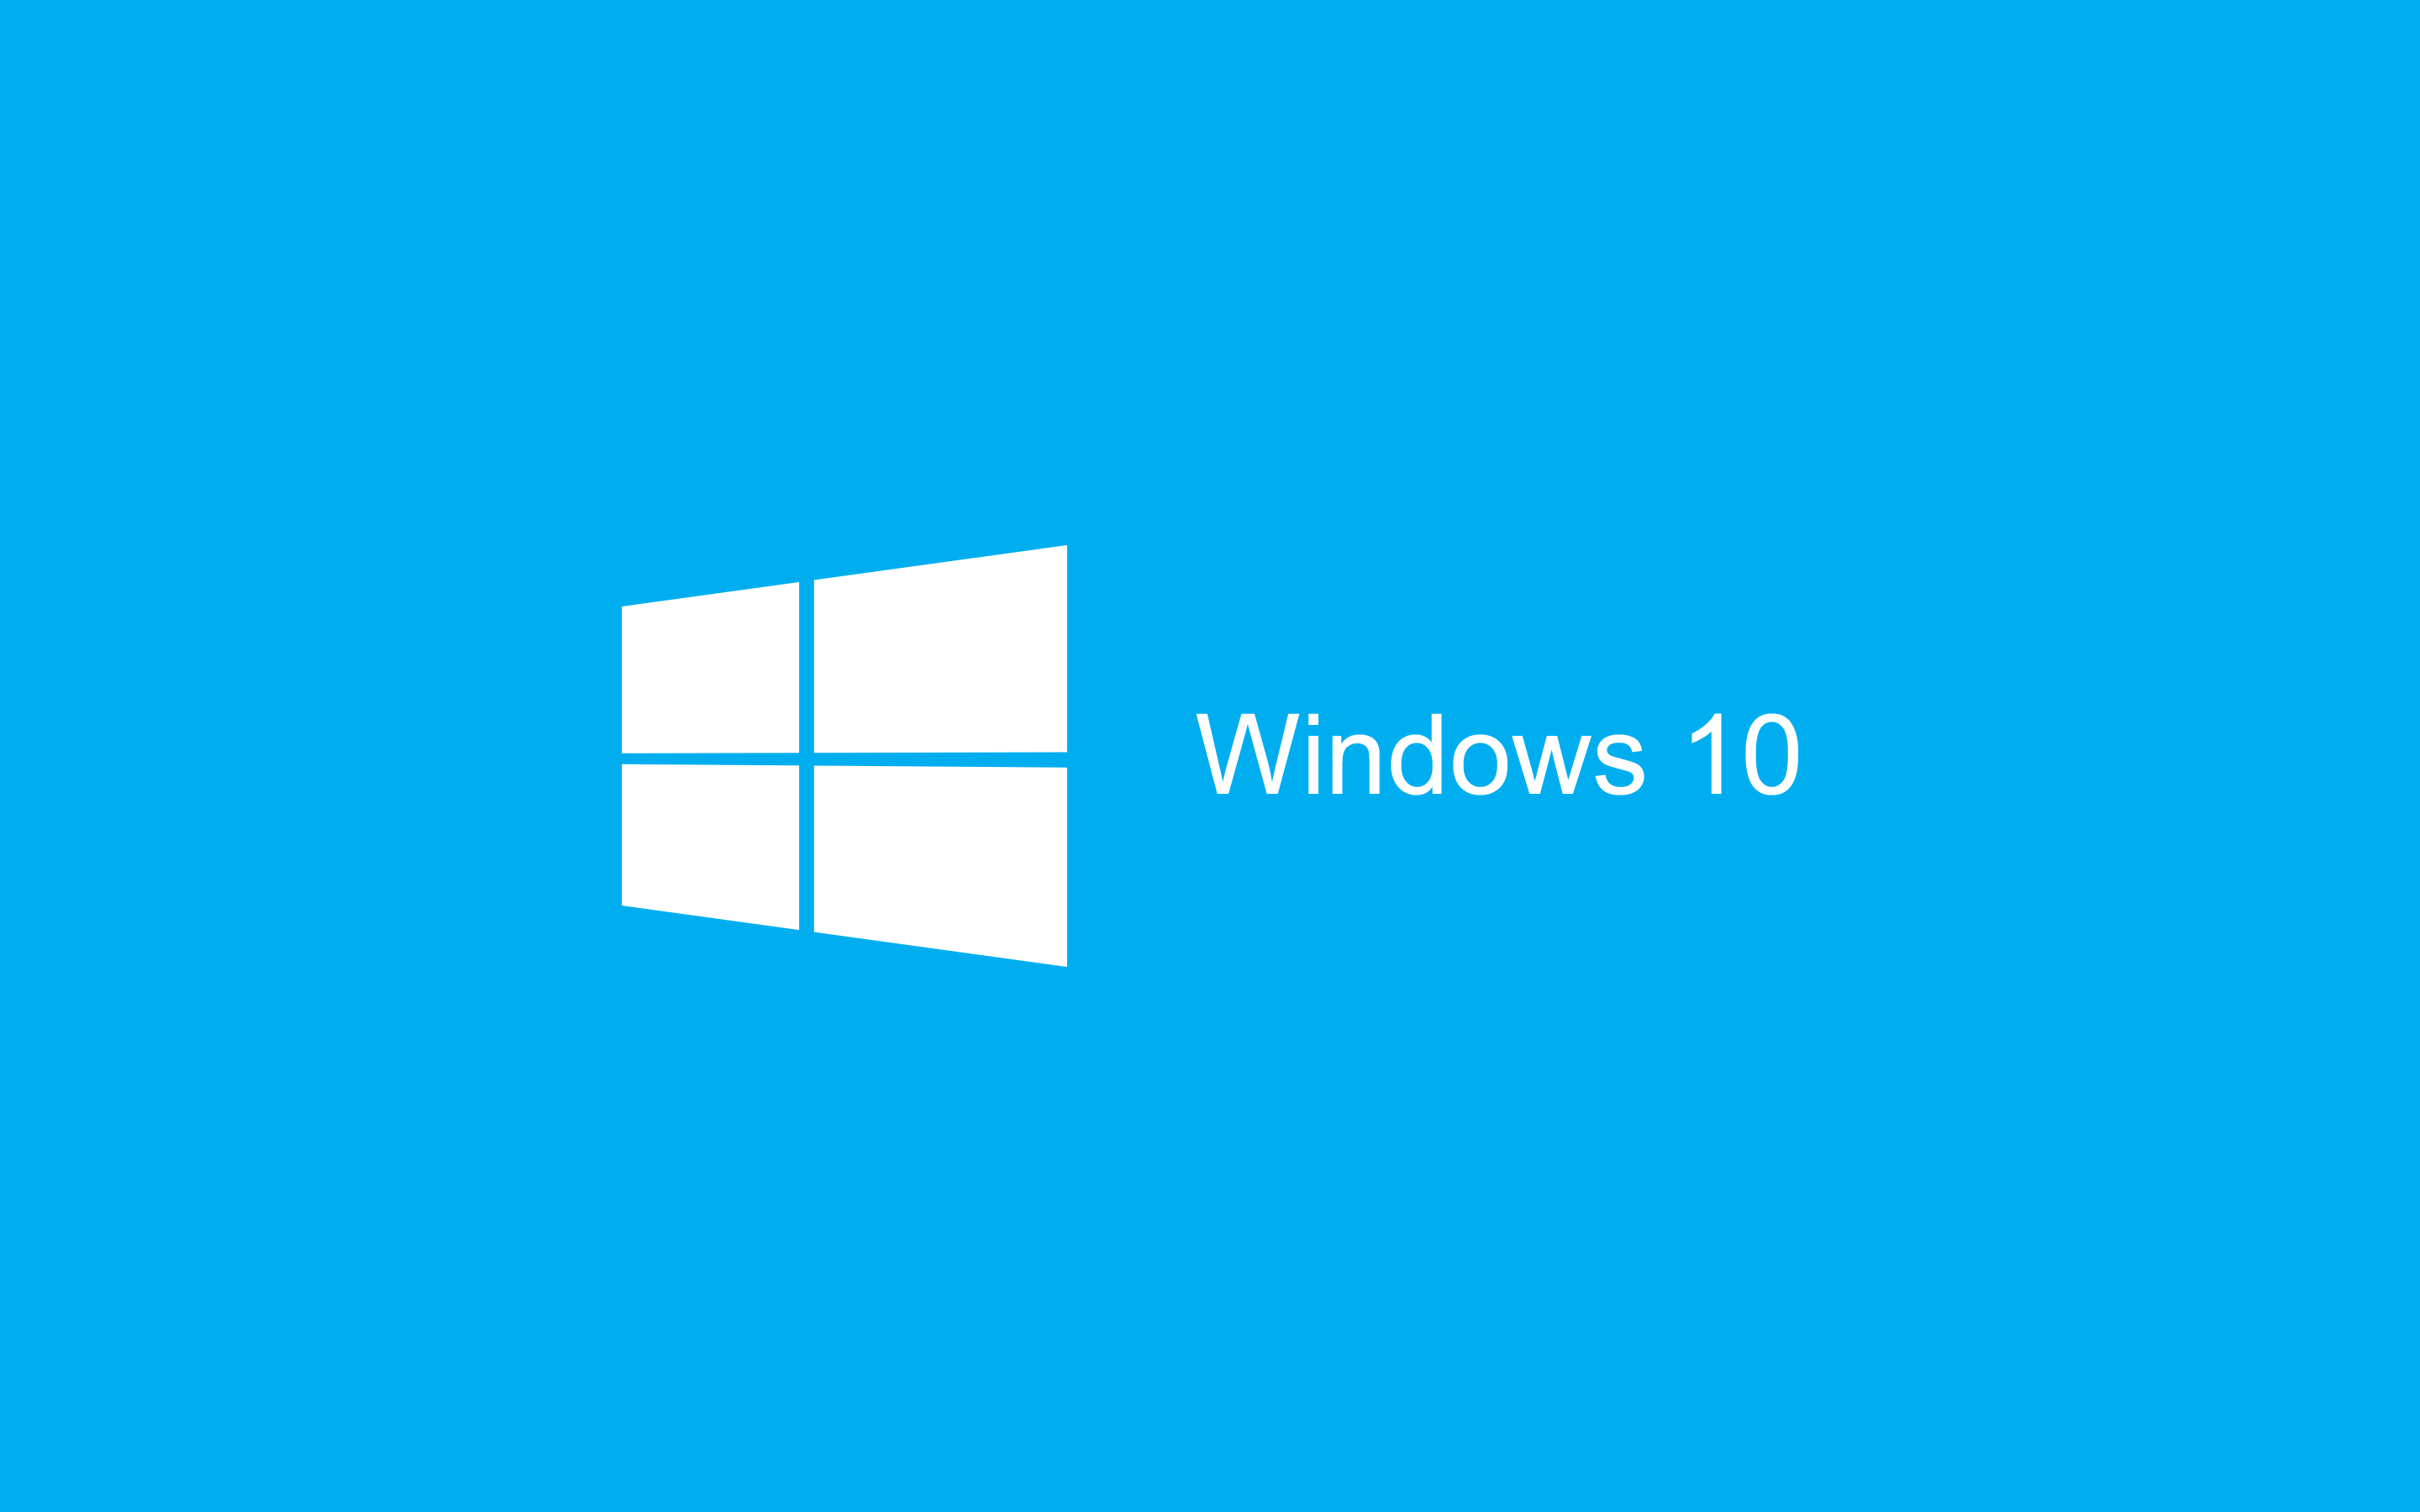 Windows 10: A Comprehensive Overview